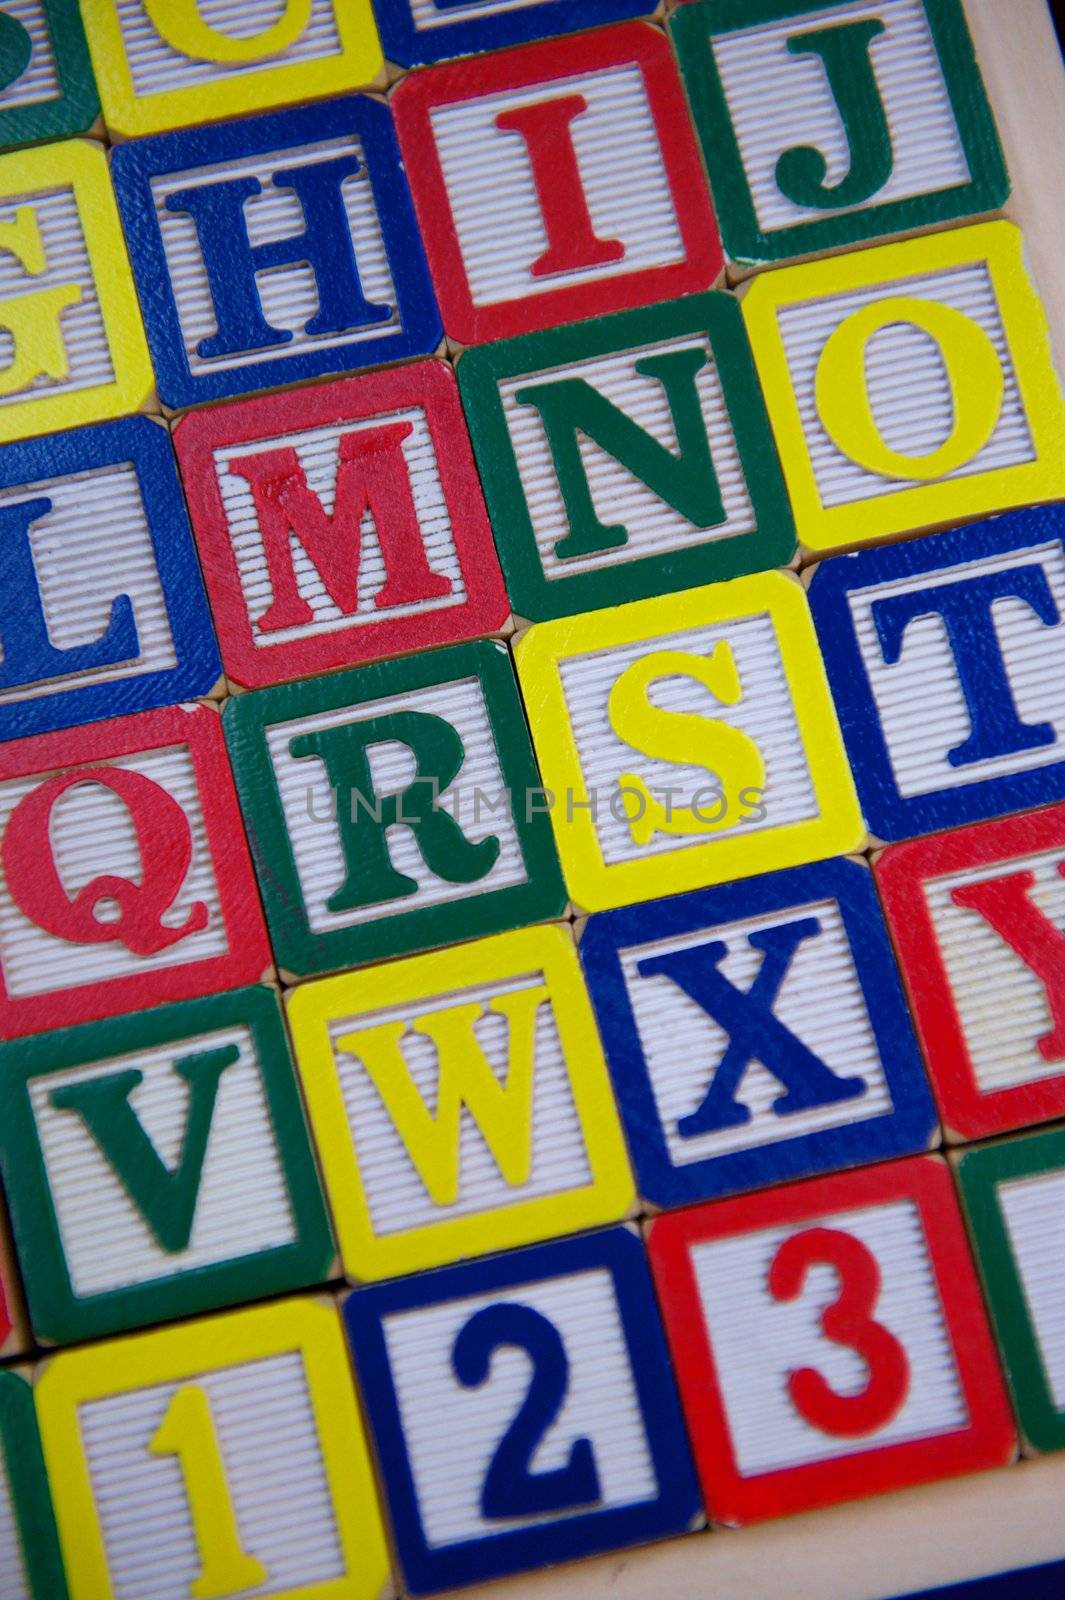 Rows of Brightly Colored Children's Wooden Alphabet Blocks